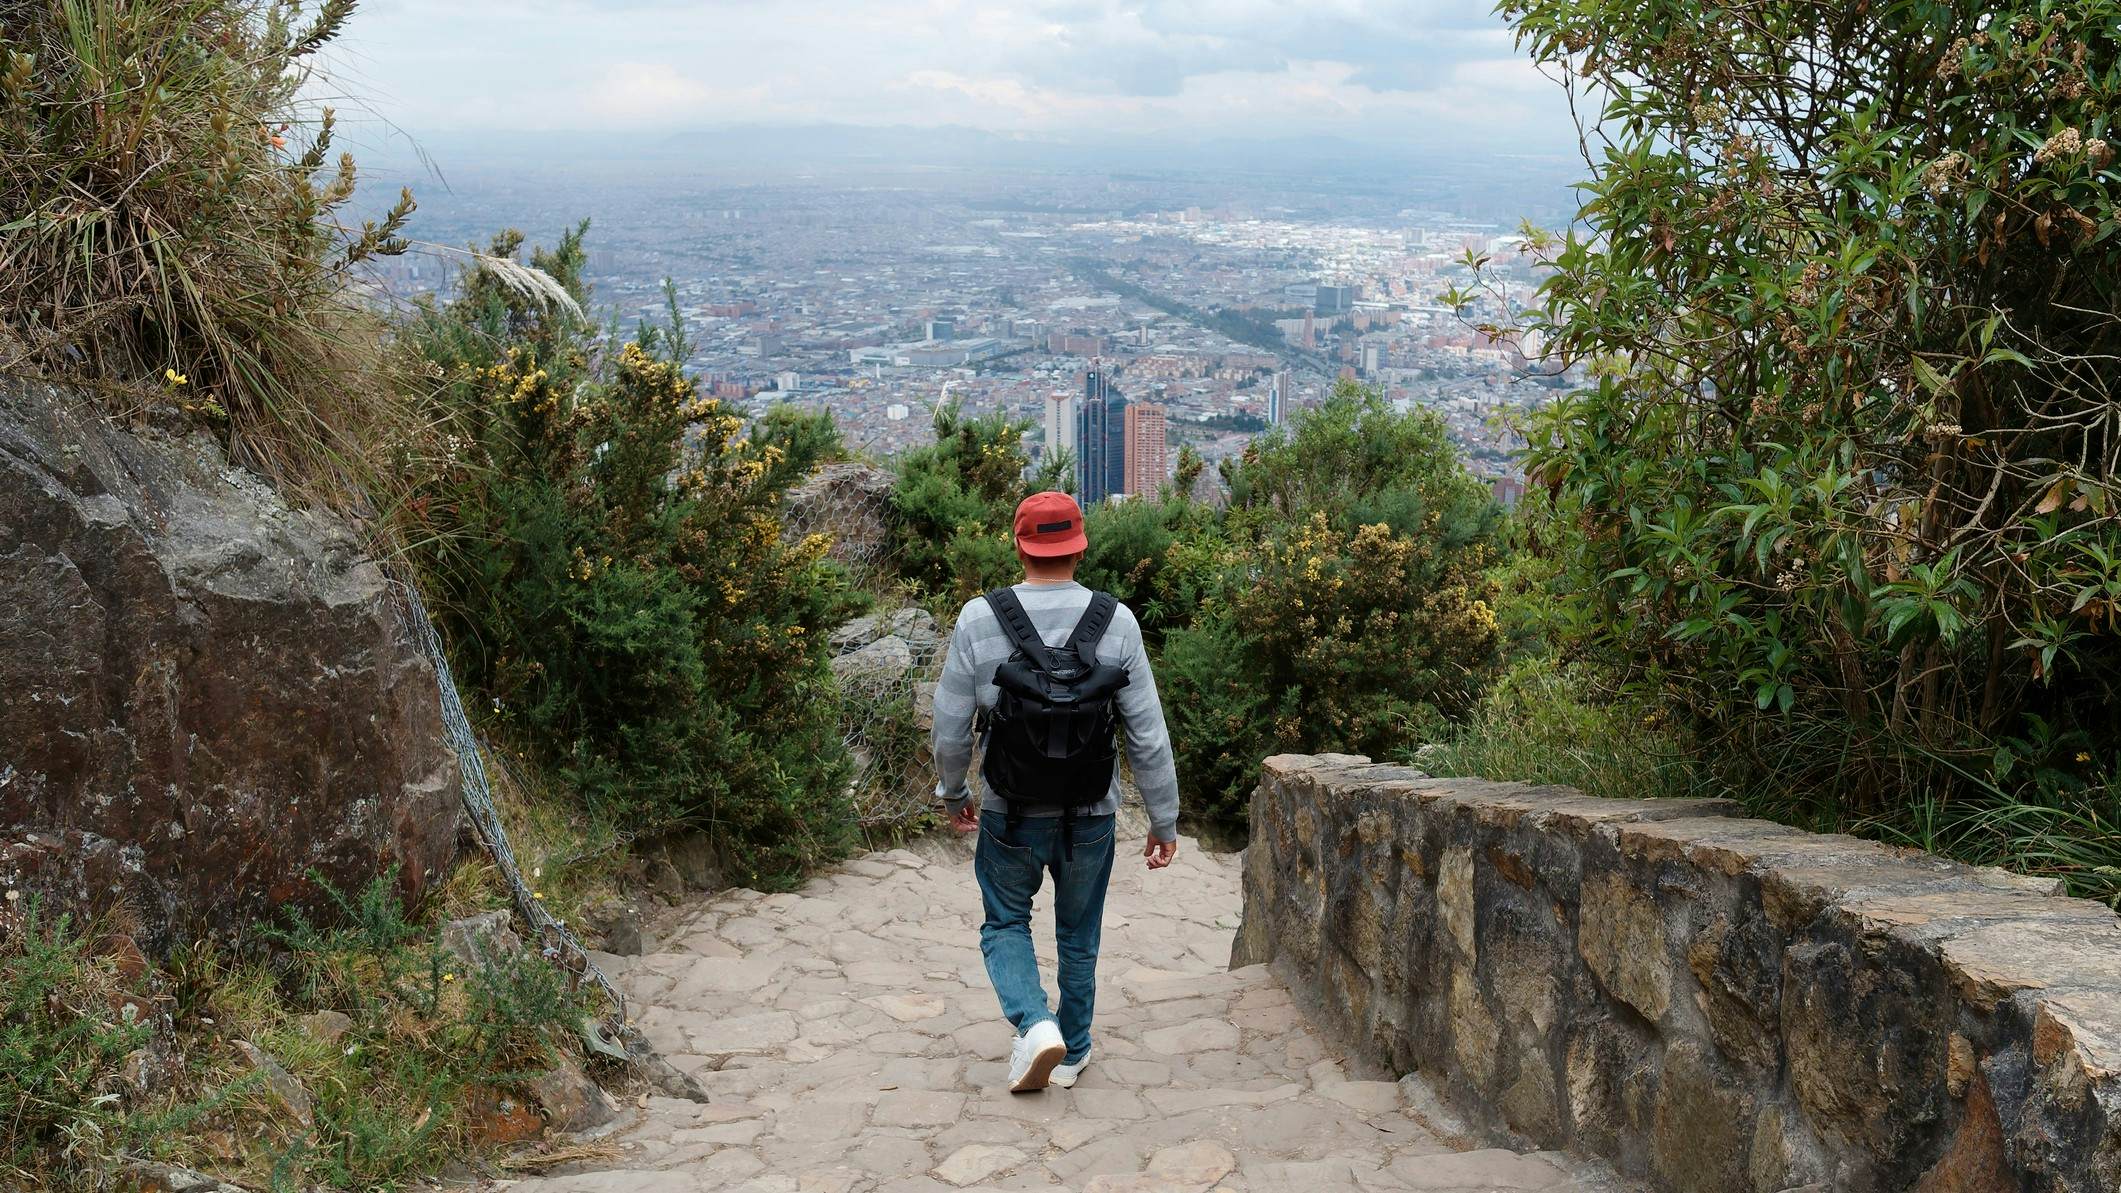 Why Cali, Colombia should be your next urban adventure - Lonely Planet